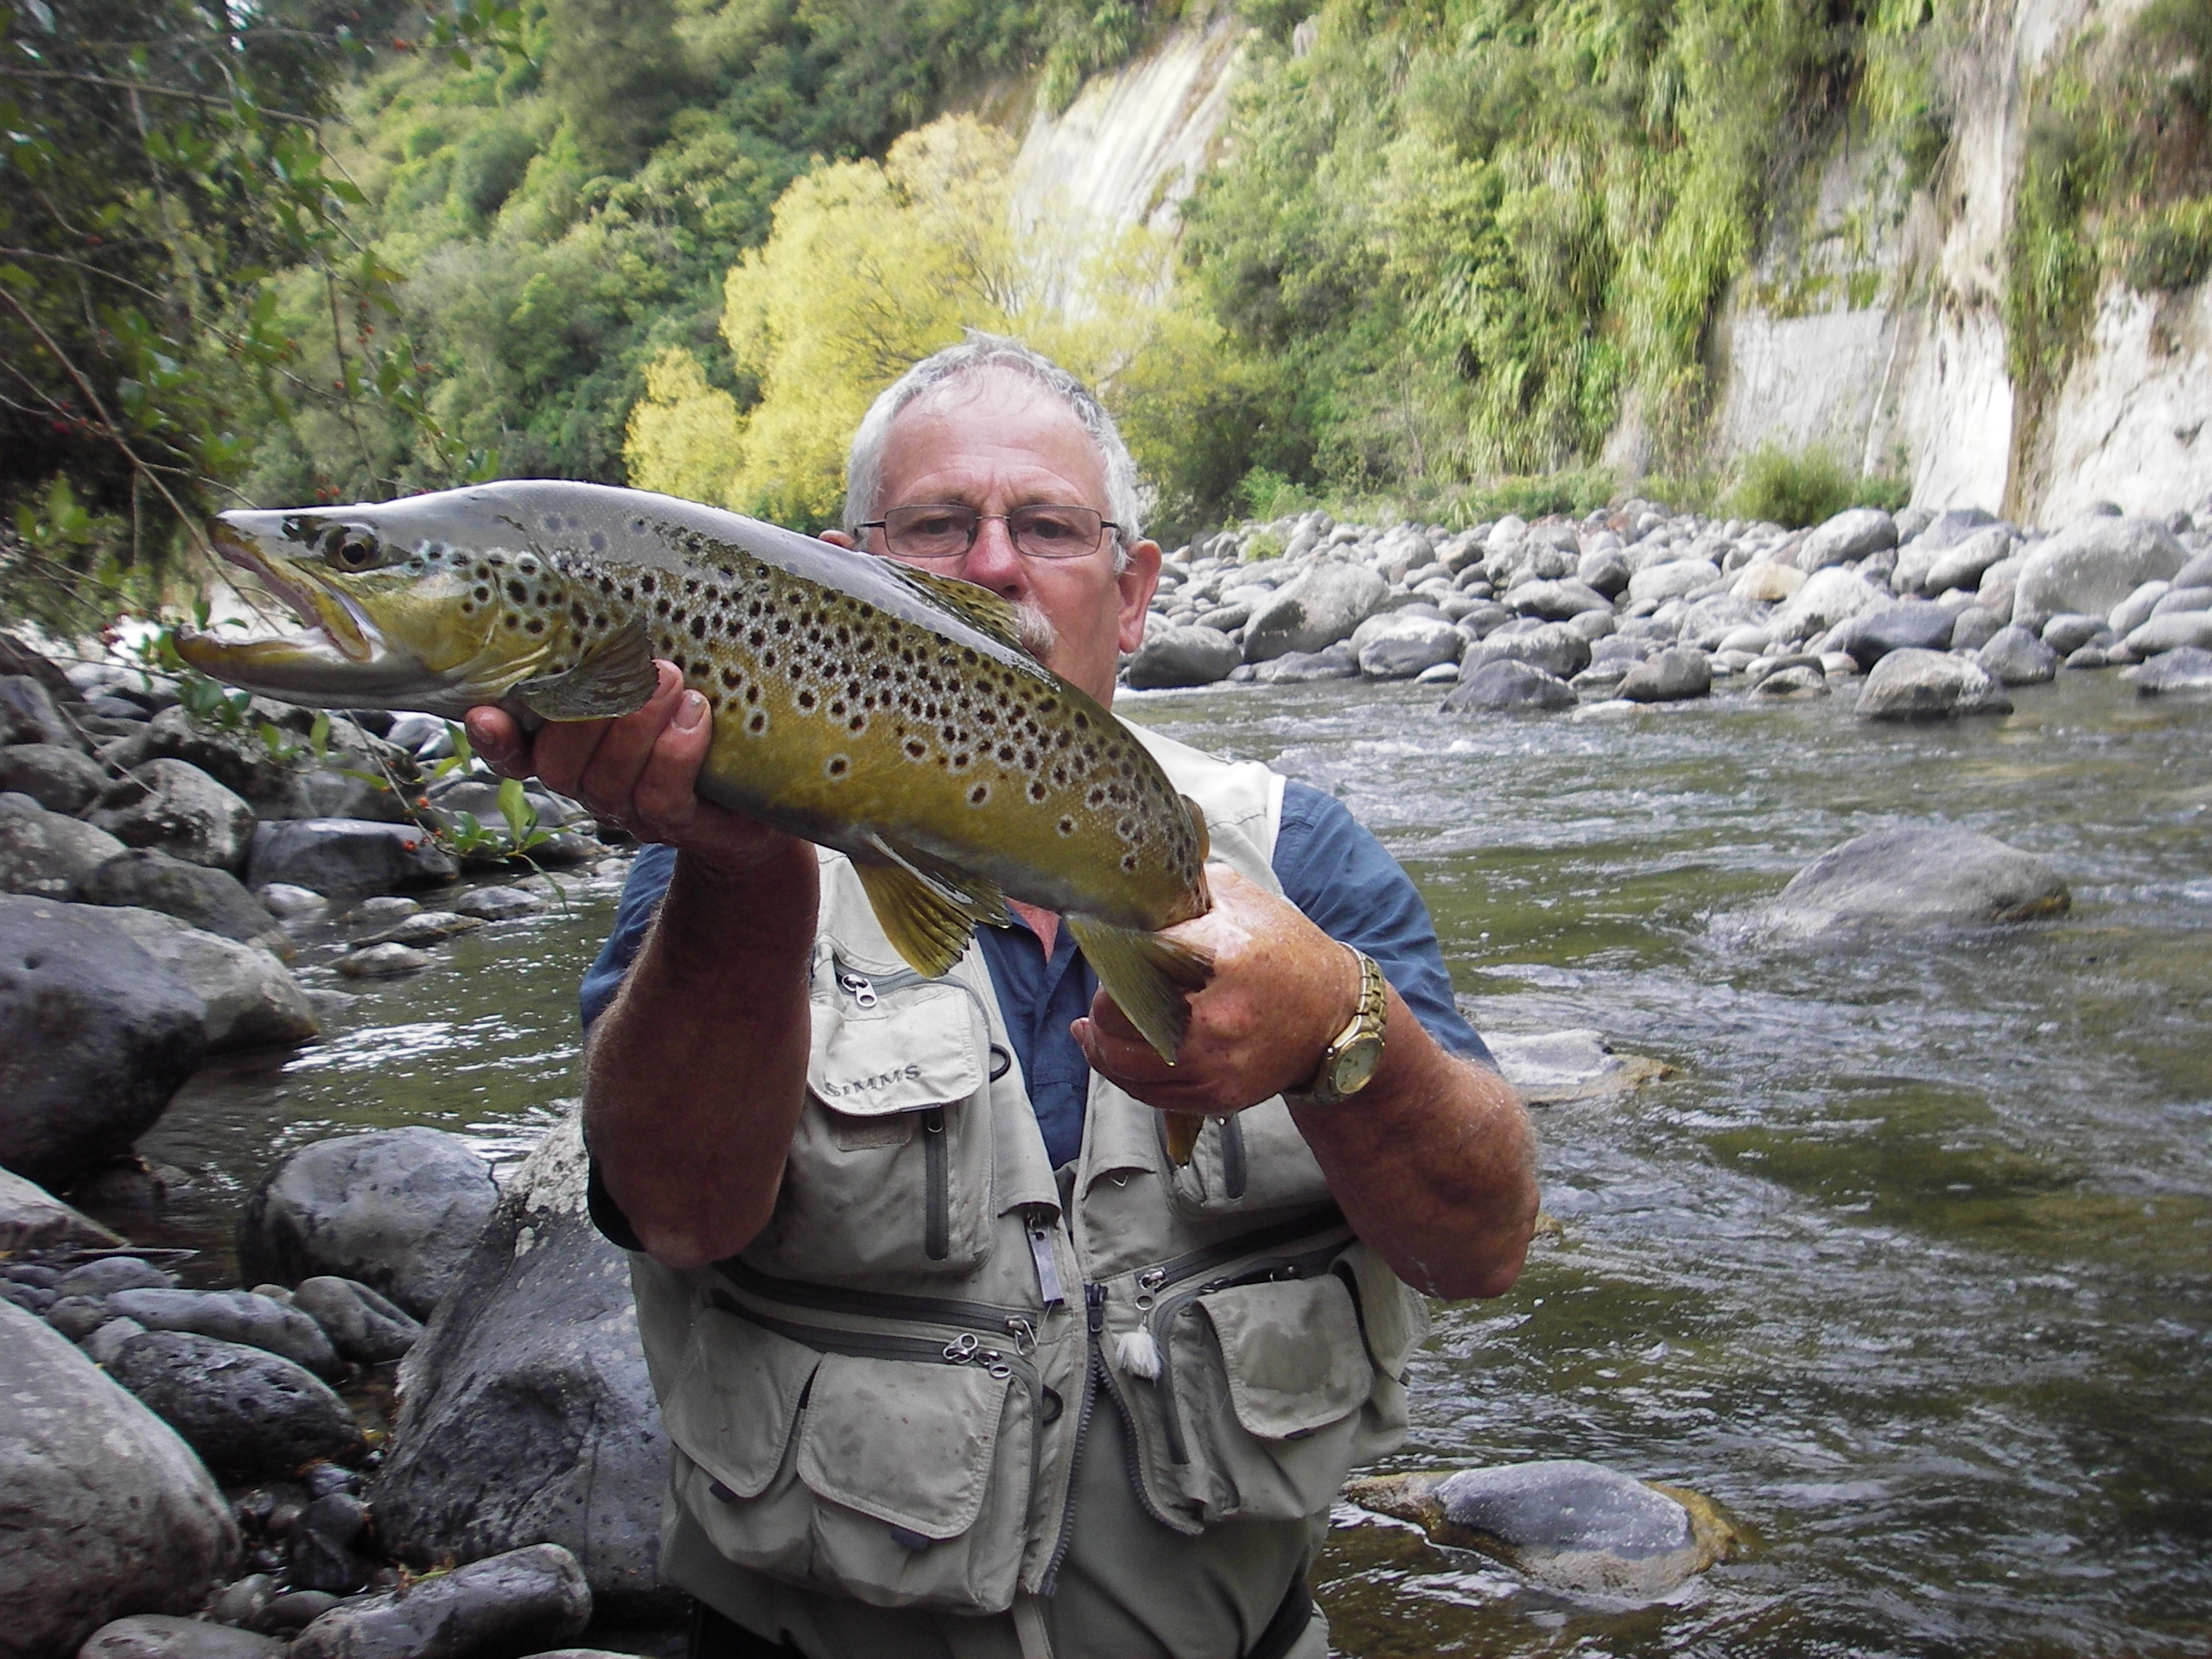 Trout fishing is one of the major local attractions in Turangi